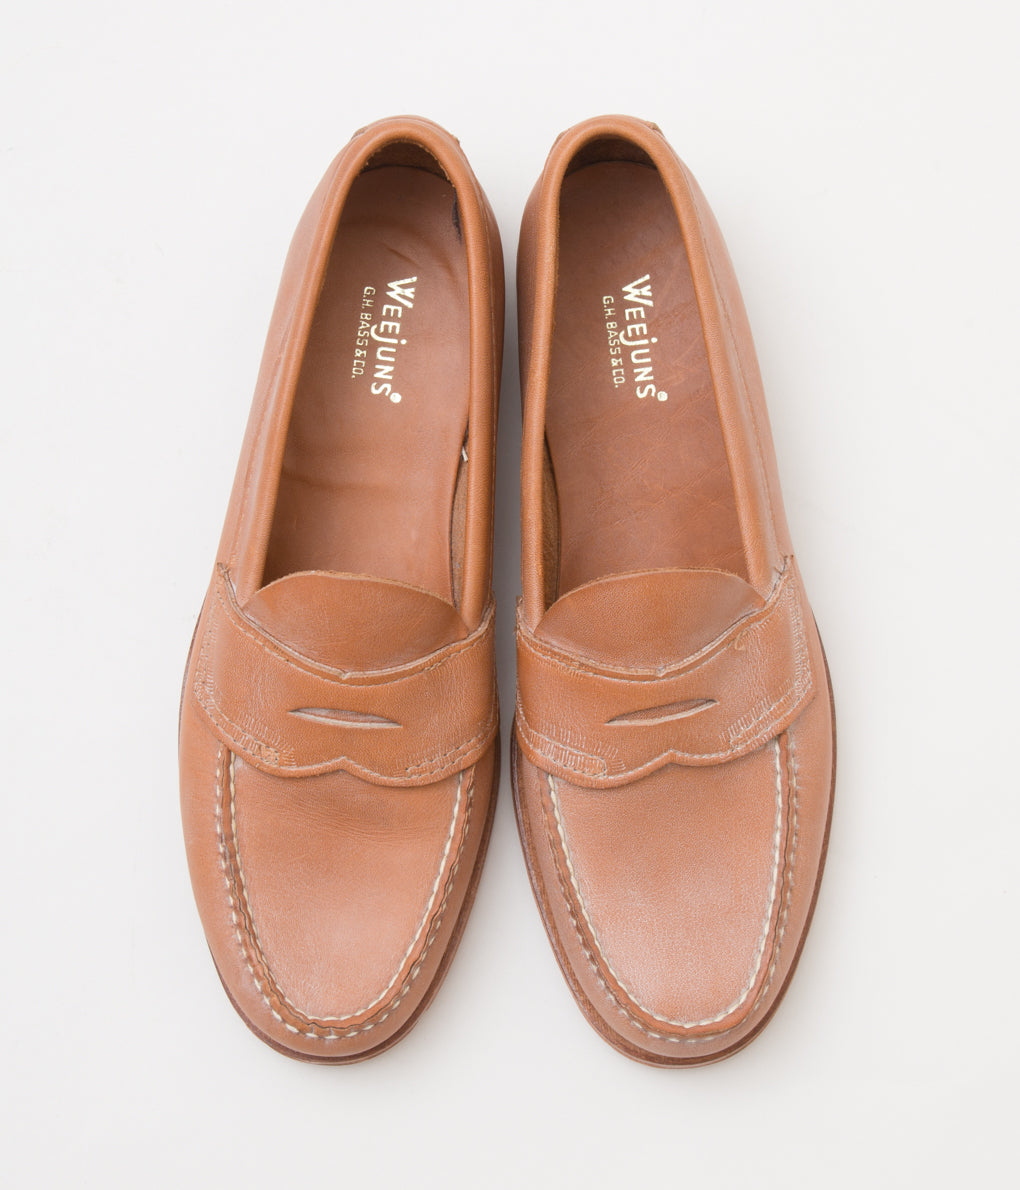 FROM USA "VINTAGE GHBASS PENNY LOAFERS"(TAN)